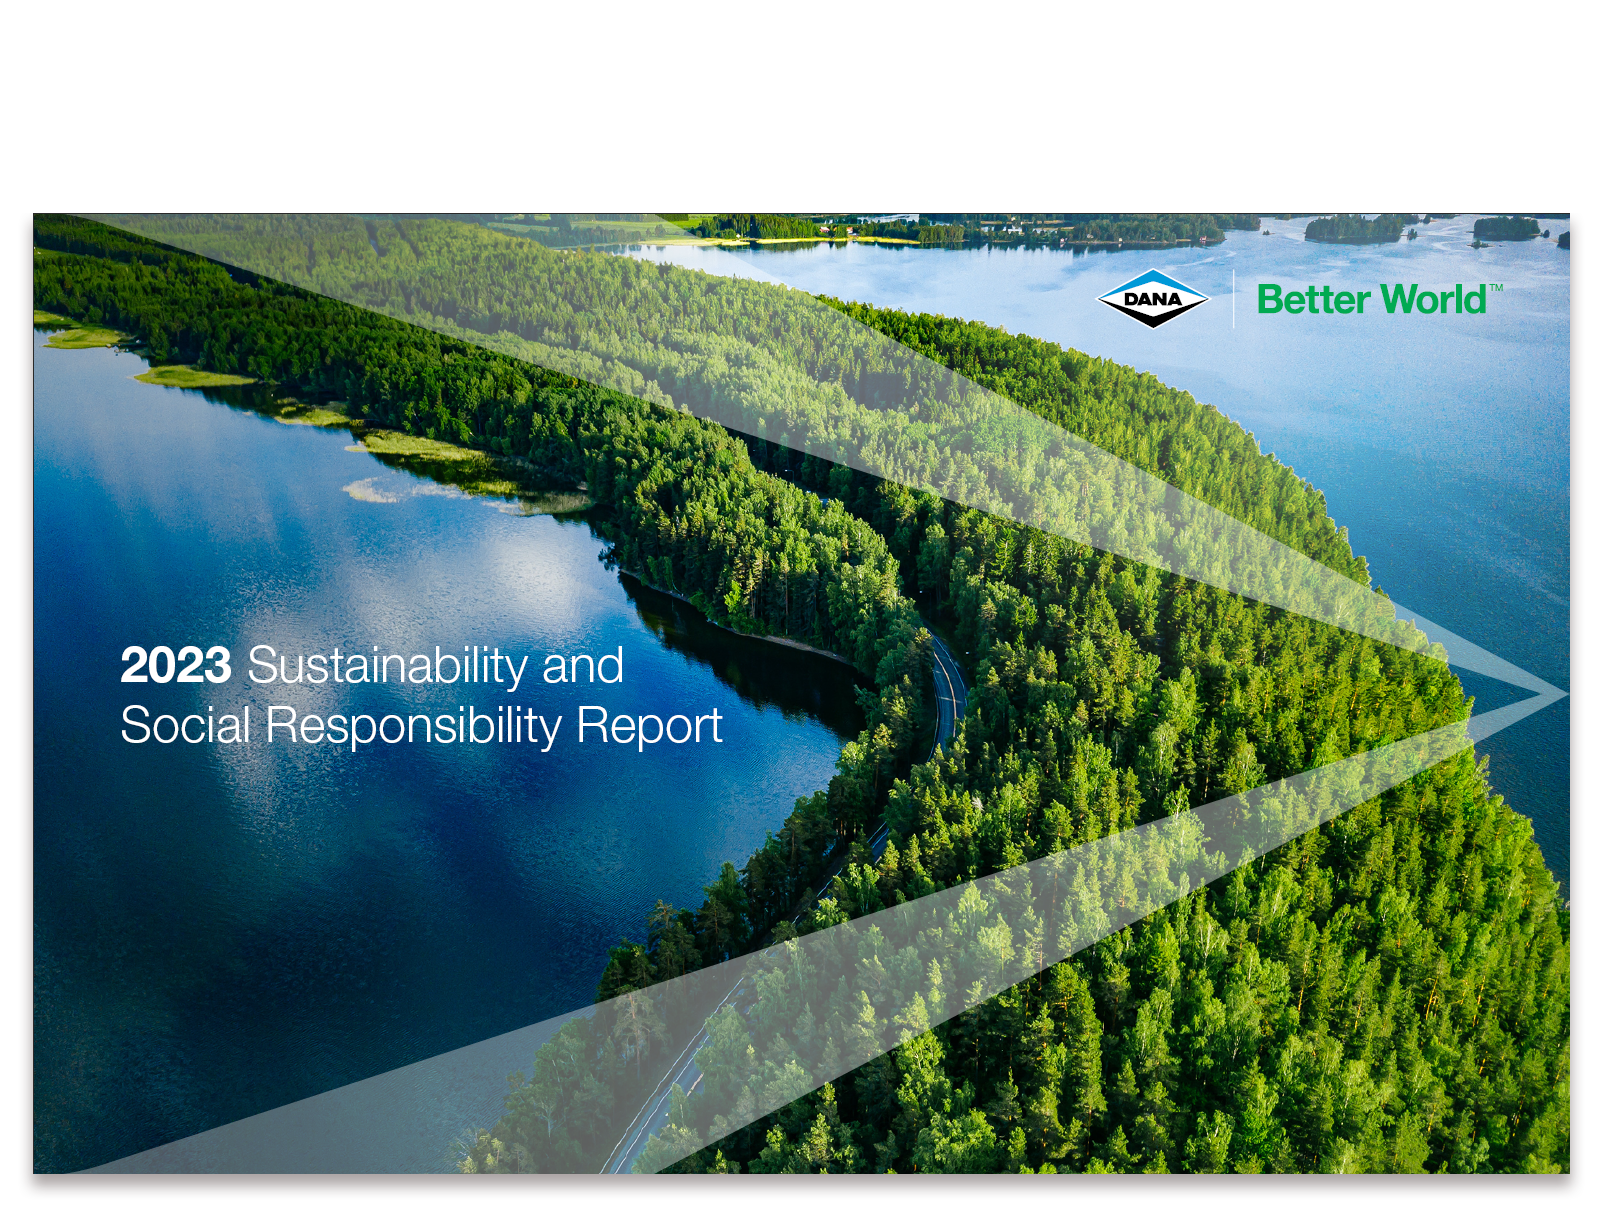 2023 Sustainability and Social Responsibility Report cover